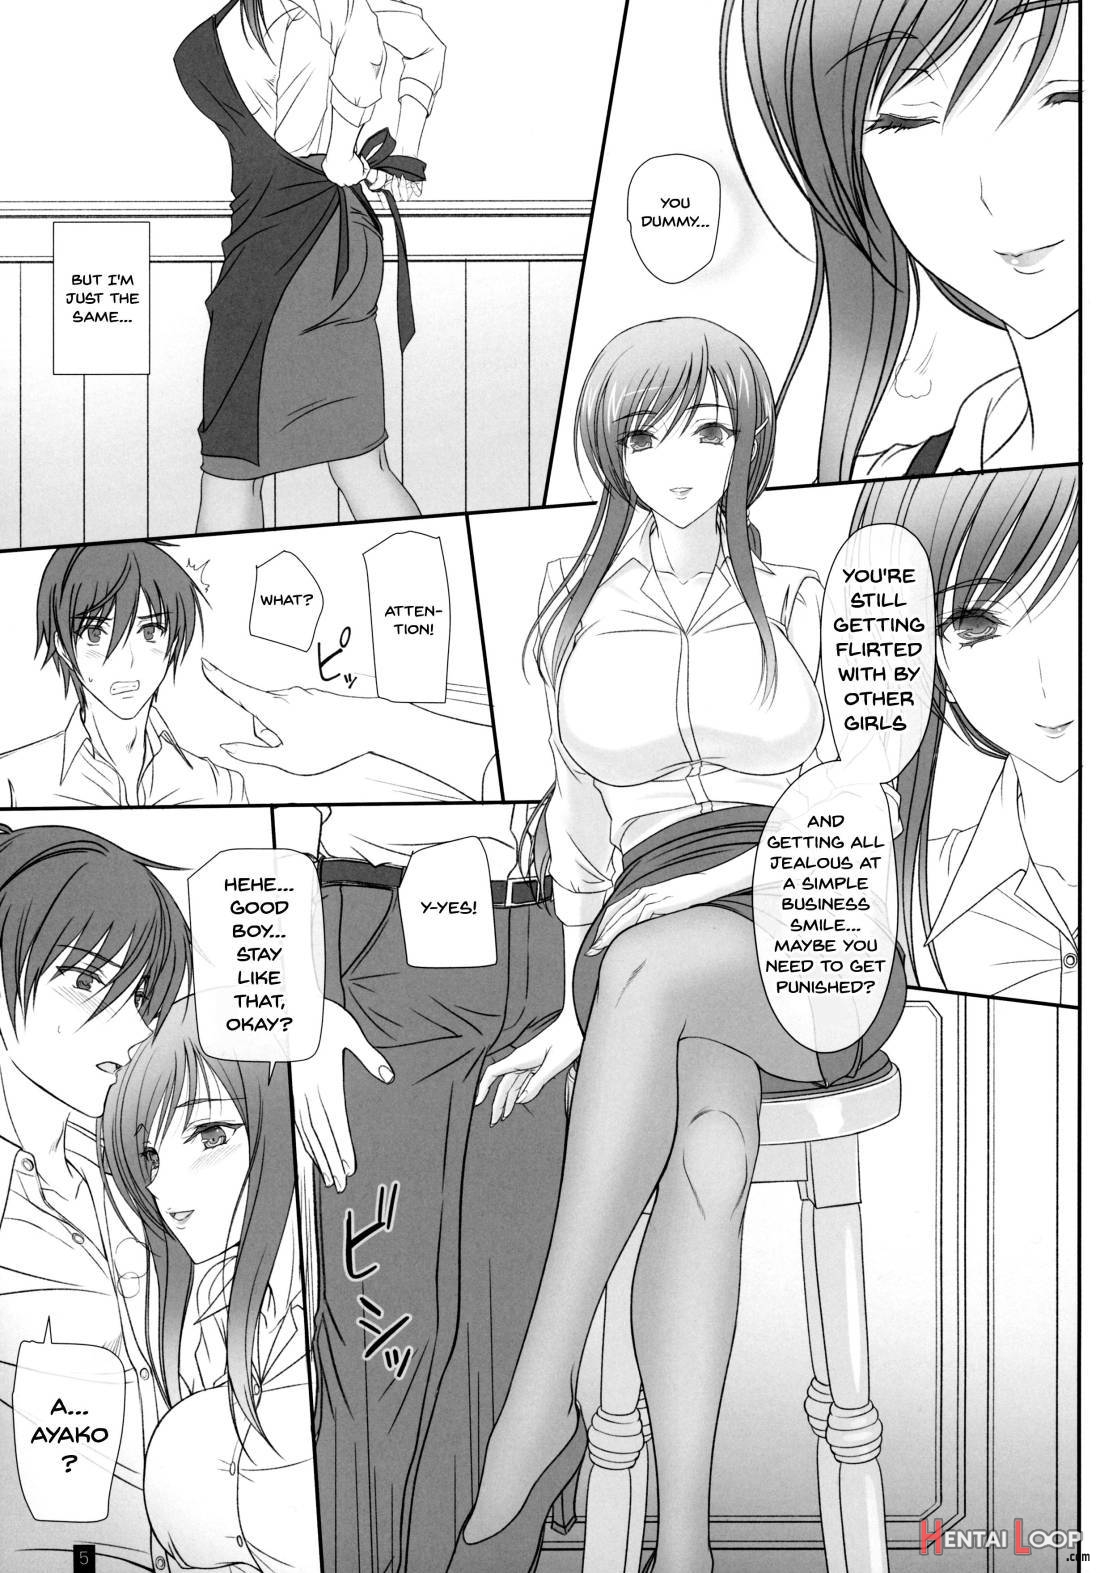 Oh! Ayako! More!&More!! page 4